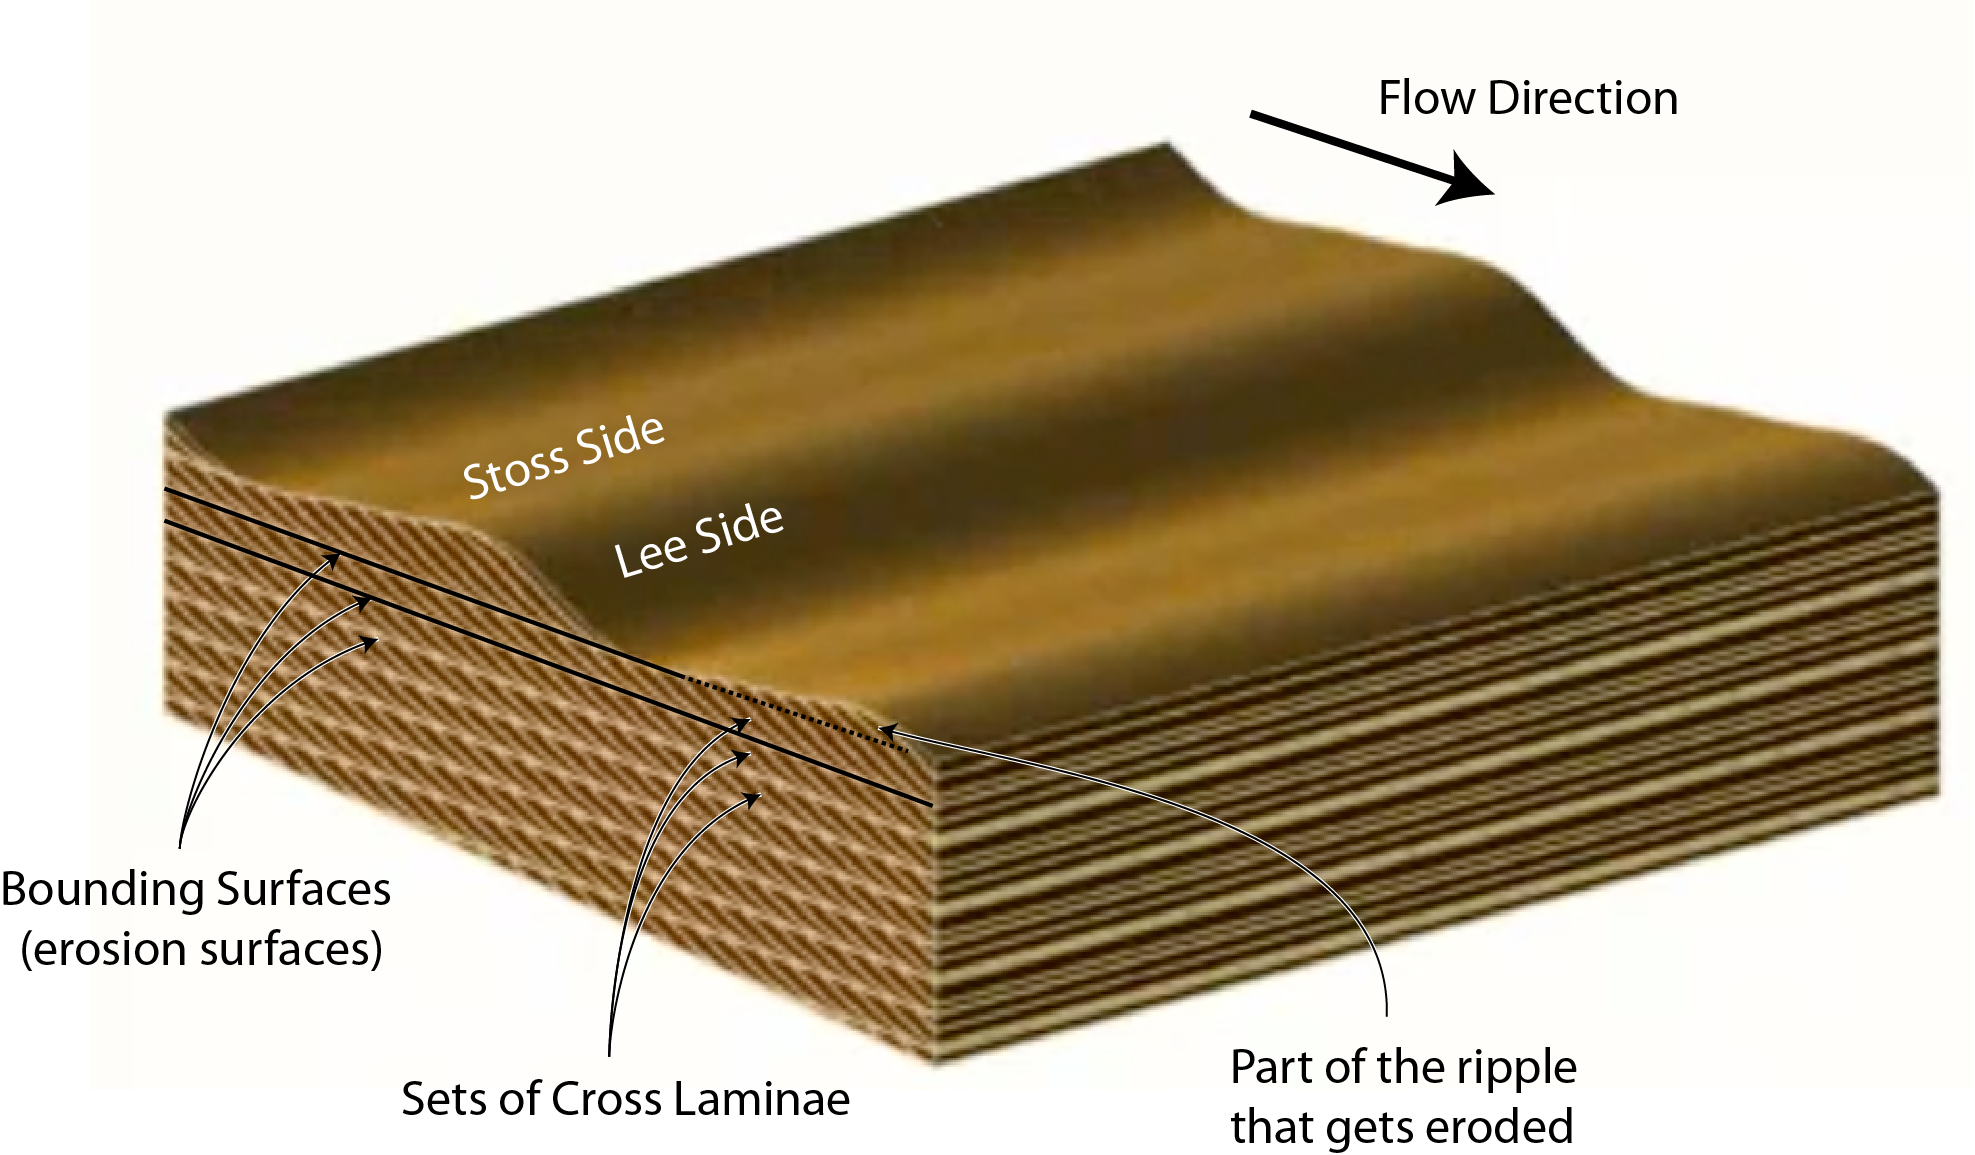 A frame from a USGS model of bedform migration annotated with the flow direction, stoss side, lee side, bounding surfaces, sets of cross laminae, and area of the ripple that gets eroded.